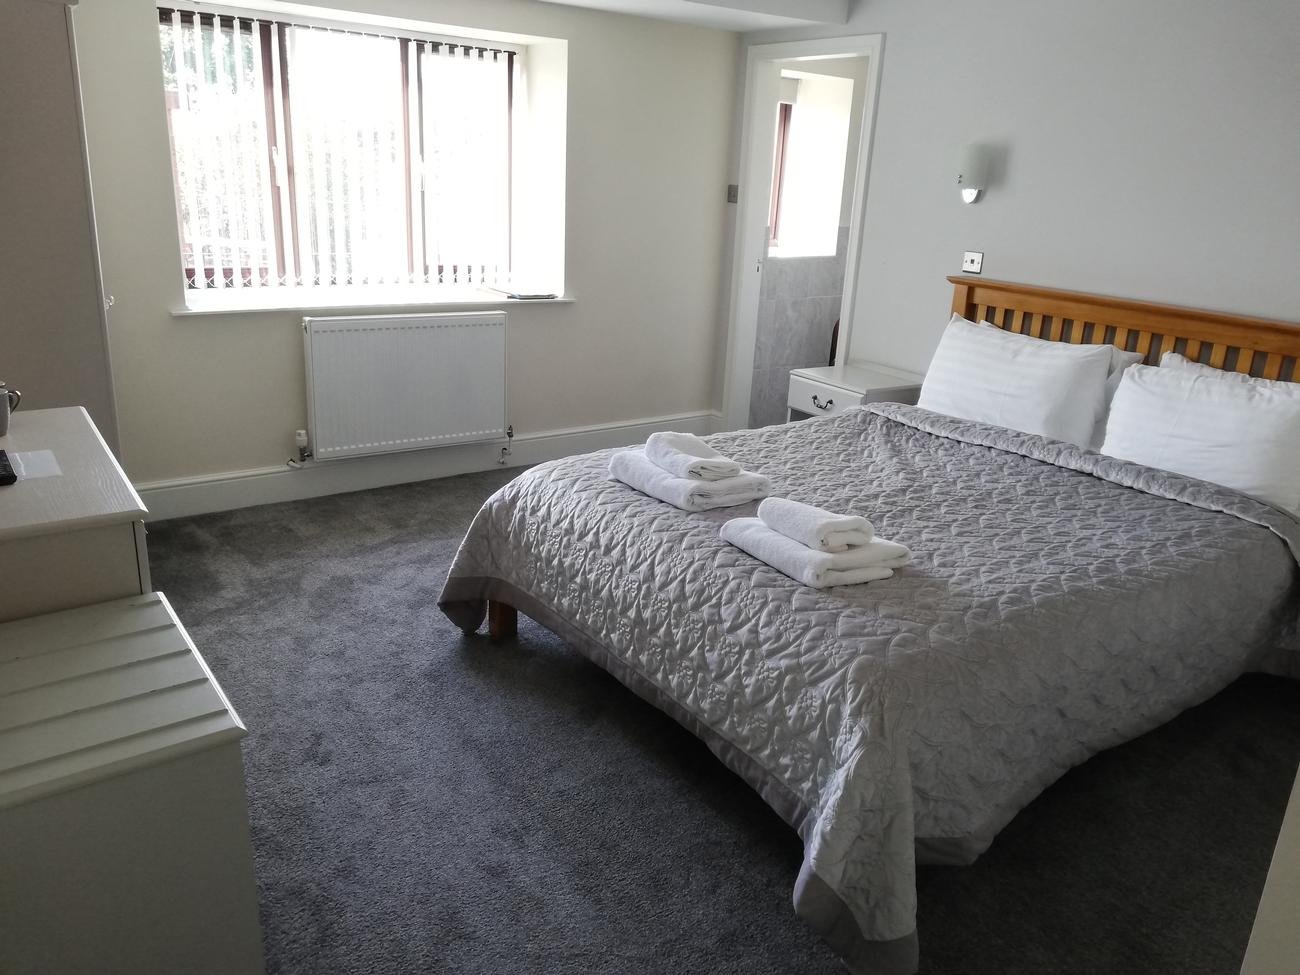 Hotel Rooms in North Wales and Cheshire | Flint Mountain Park Hotel gallery image 6